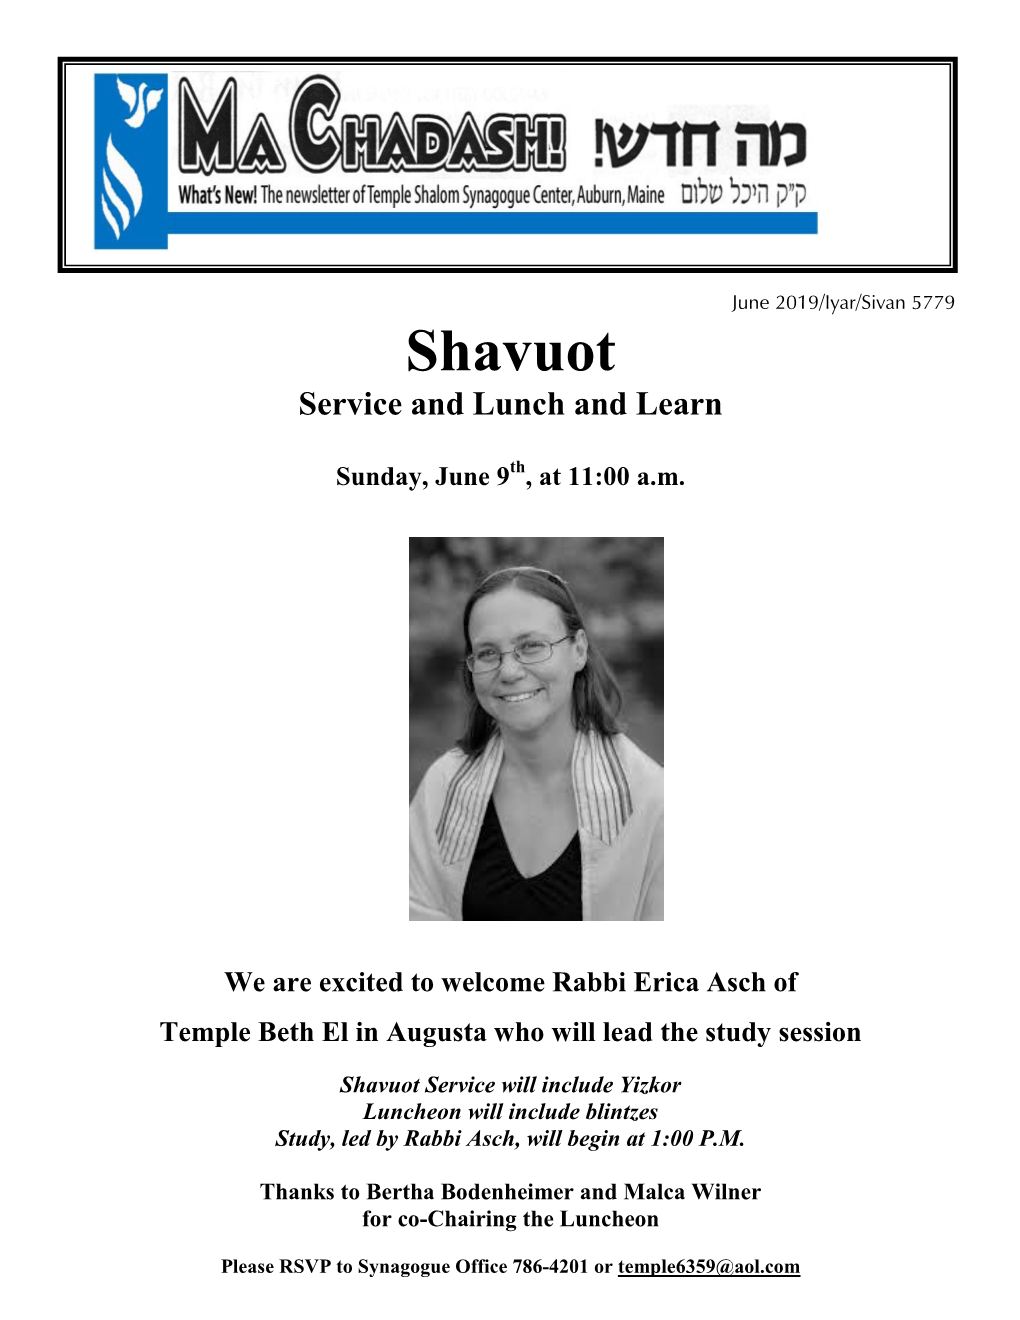 Shavuot Service and Lunch and Learn